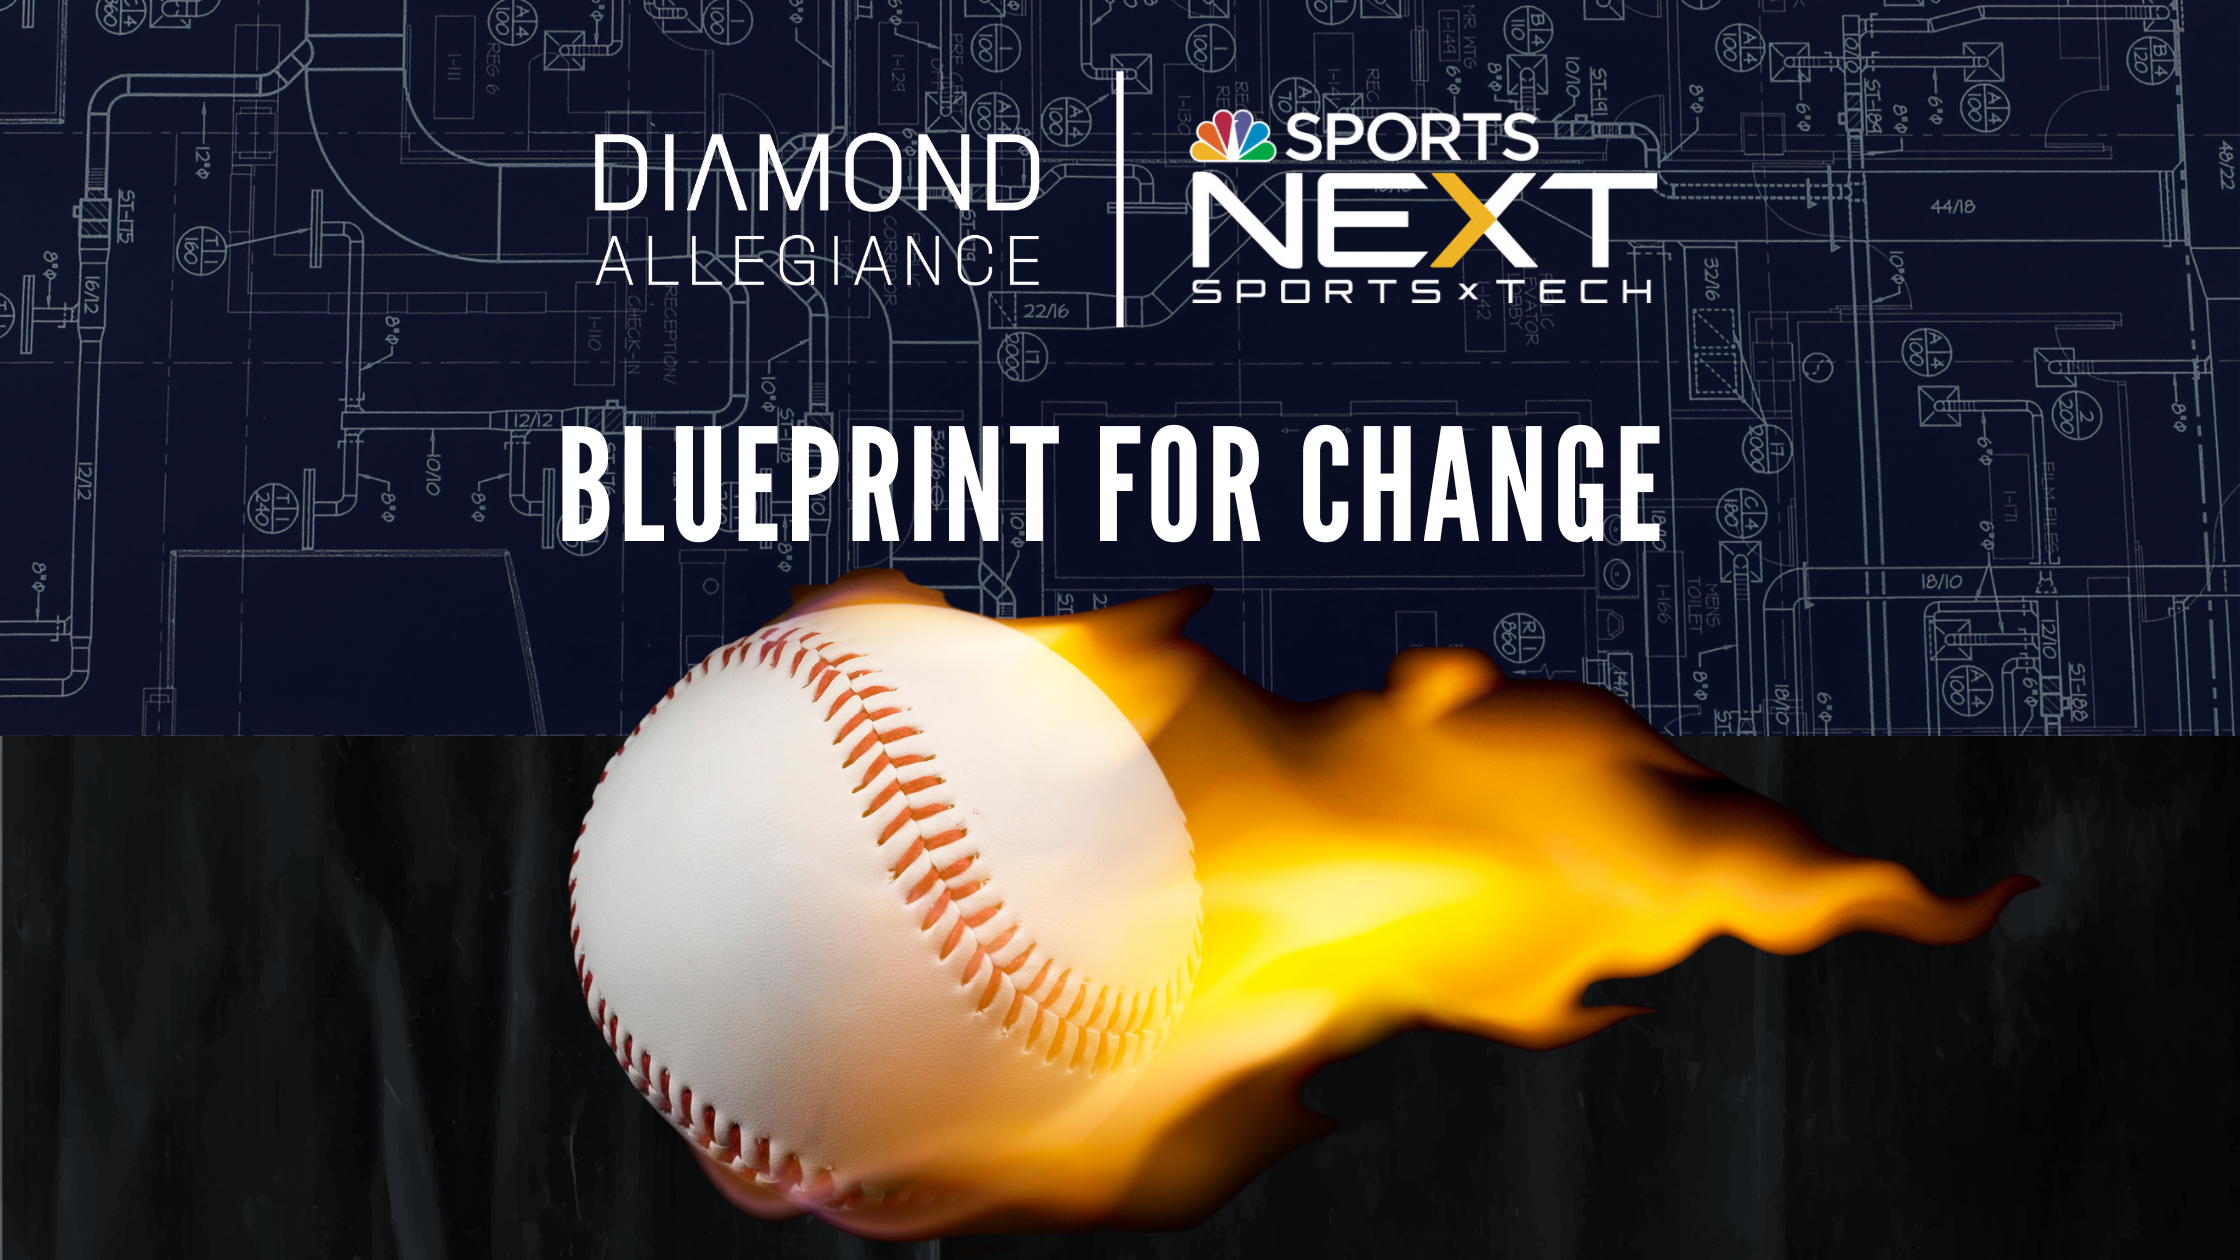 Diamond Allegiance Announces "Blueprint for Change" with $1 Billion Commitment to Club Baseball featured image